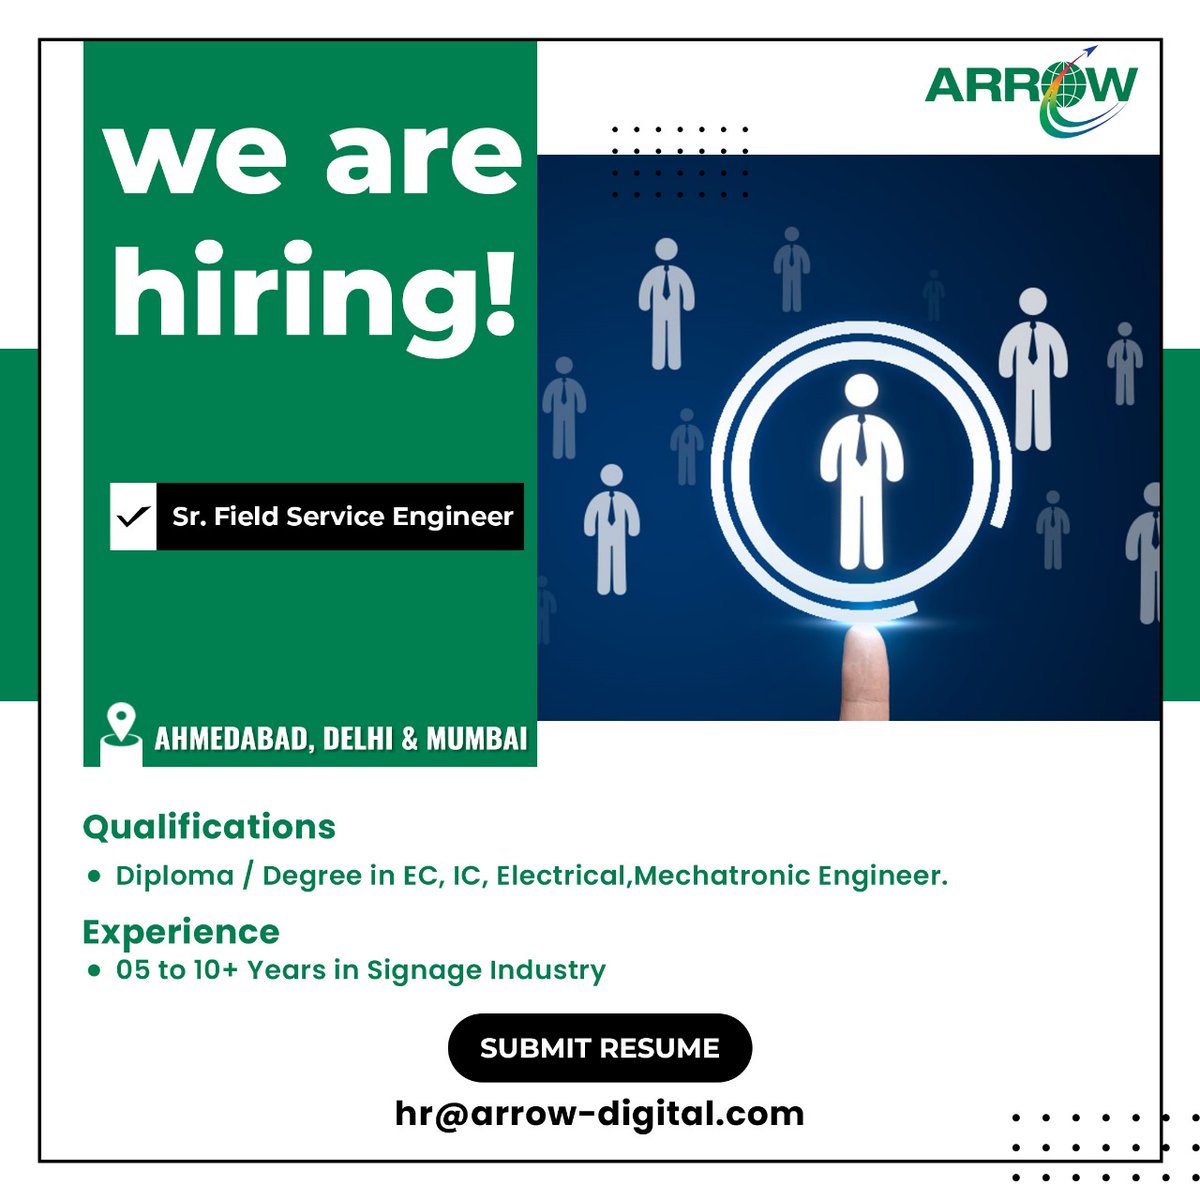 Hiring Alert!

We are hiring 𝐒𝐫. 𝐅𝐢𝐞𝐥𝐝 𝐒𝐞𝐫𝐯𝐢𝐜𝐞 𝐄𝐧𝐠𝐢𝐧𝐞𝐞𝐫 for Ahmedabad, Delhi and Mumbai Branch!

Interested candidates can email their resumes to hr@arrow-digital.com.

#arrowdigital #serviceengineer #fieldserviceengineer #engineer #hiringalert #urgently